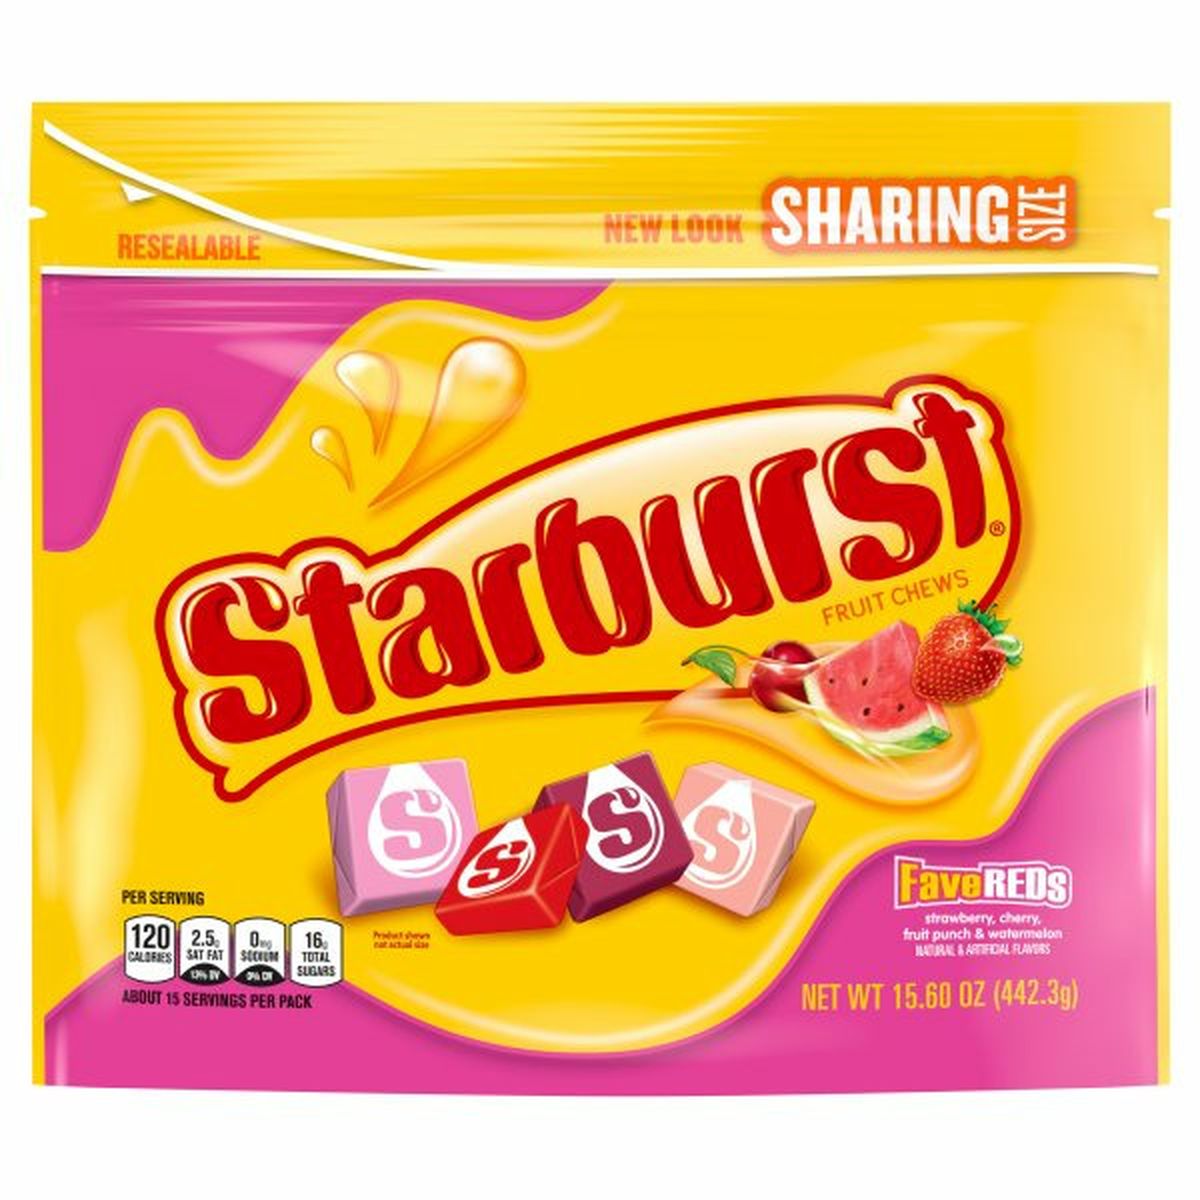 Calories in Starburst Fave Reds Chewy Candy Stand Up Pouch